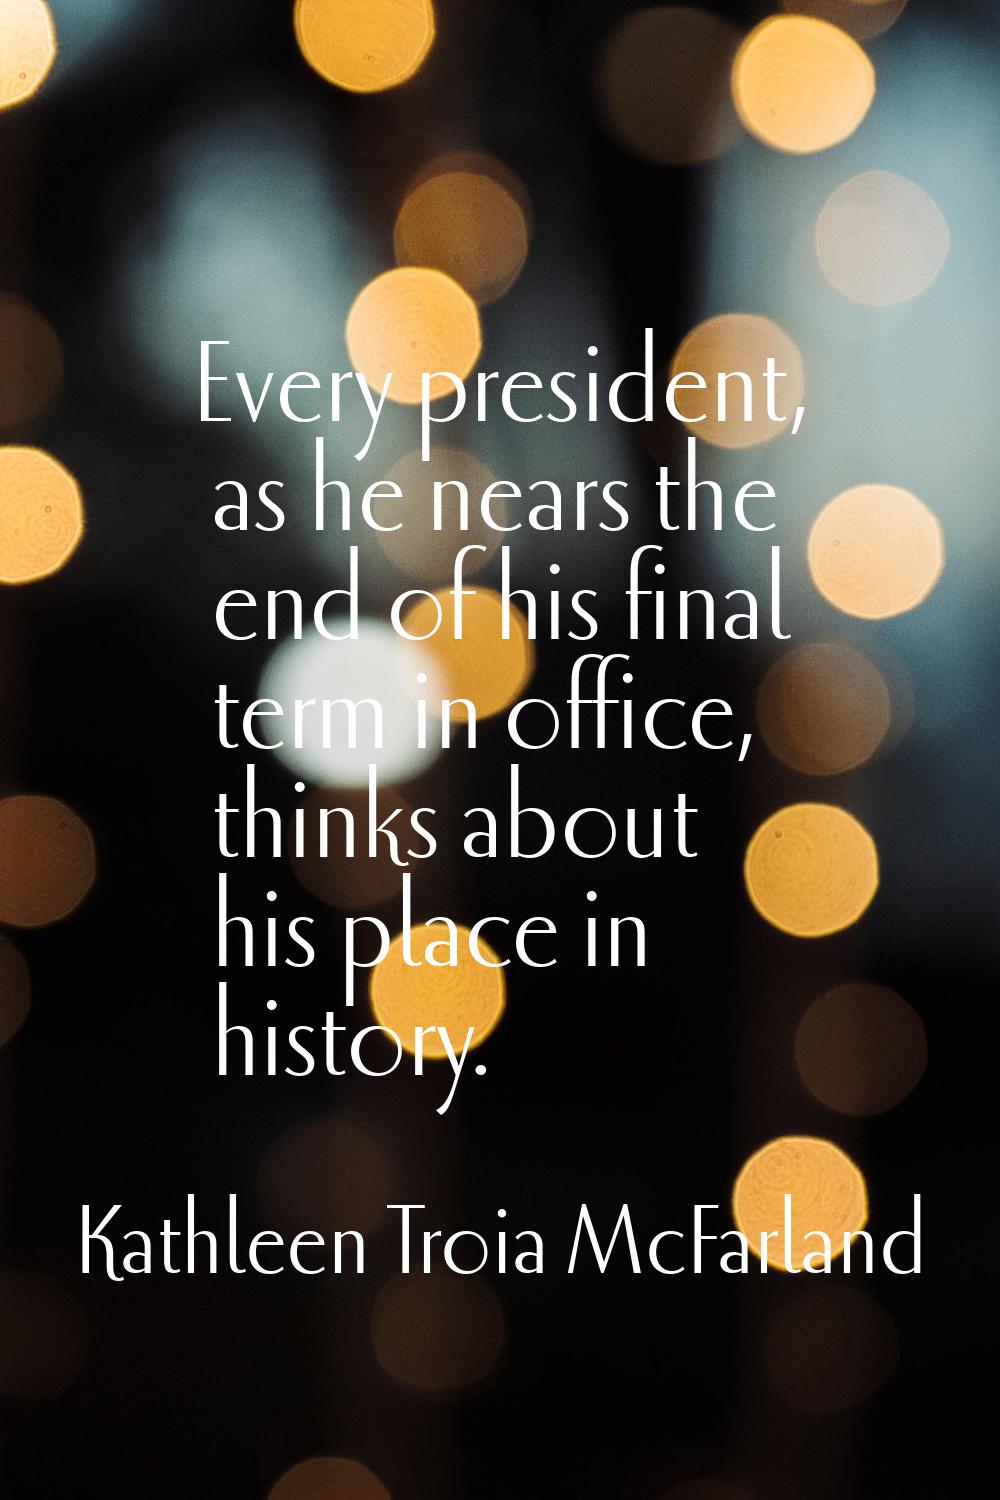 Every president, as he nears the end of his final term in office, thinks about his place in history